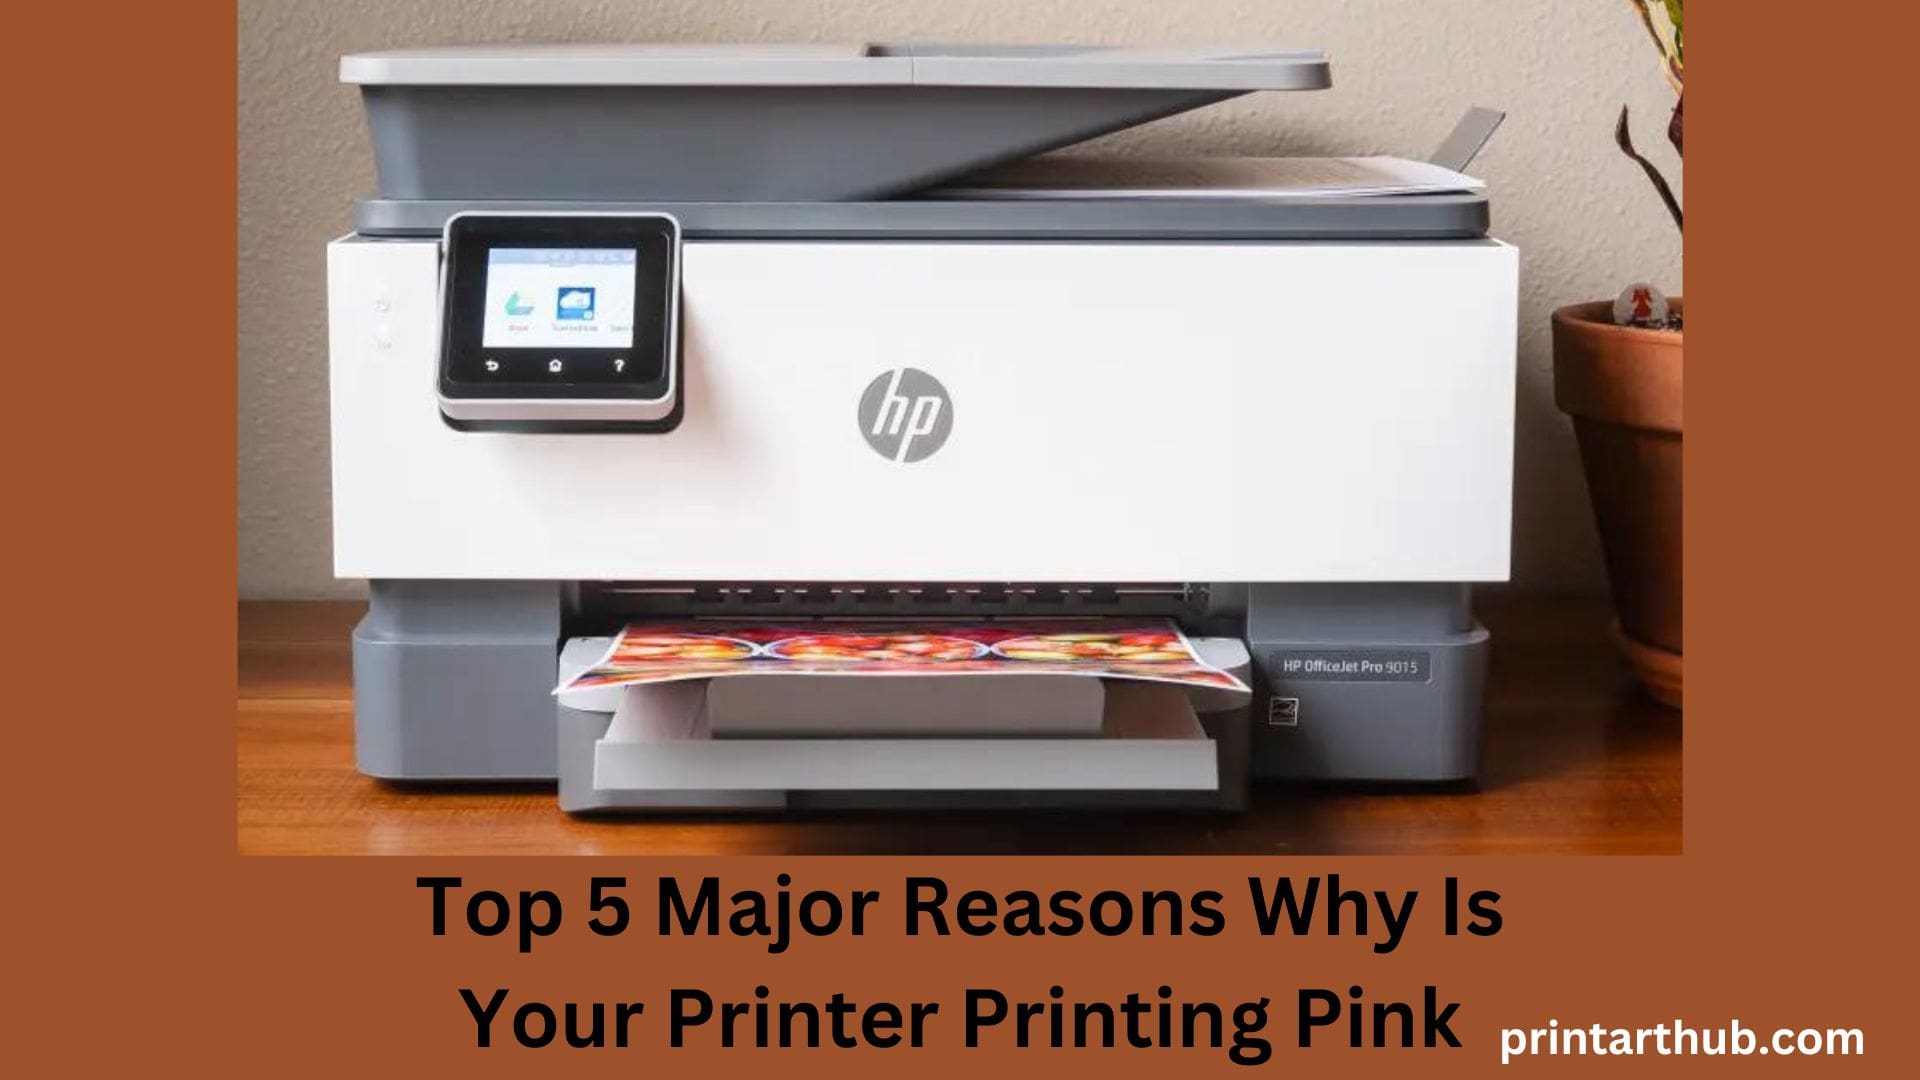 Why Is Your Printer Printing Pink